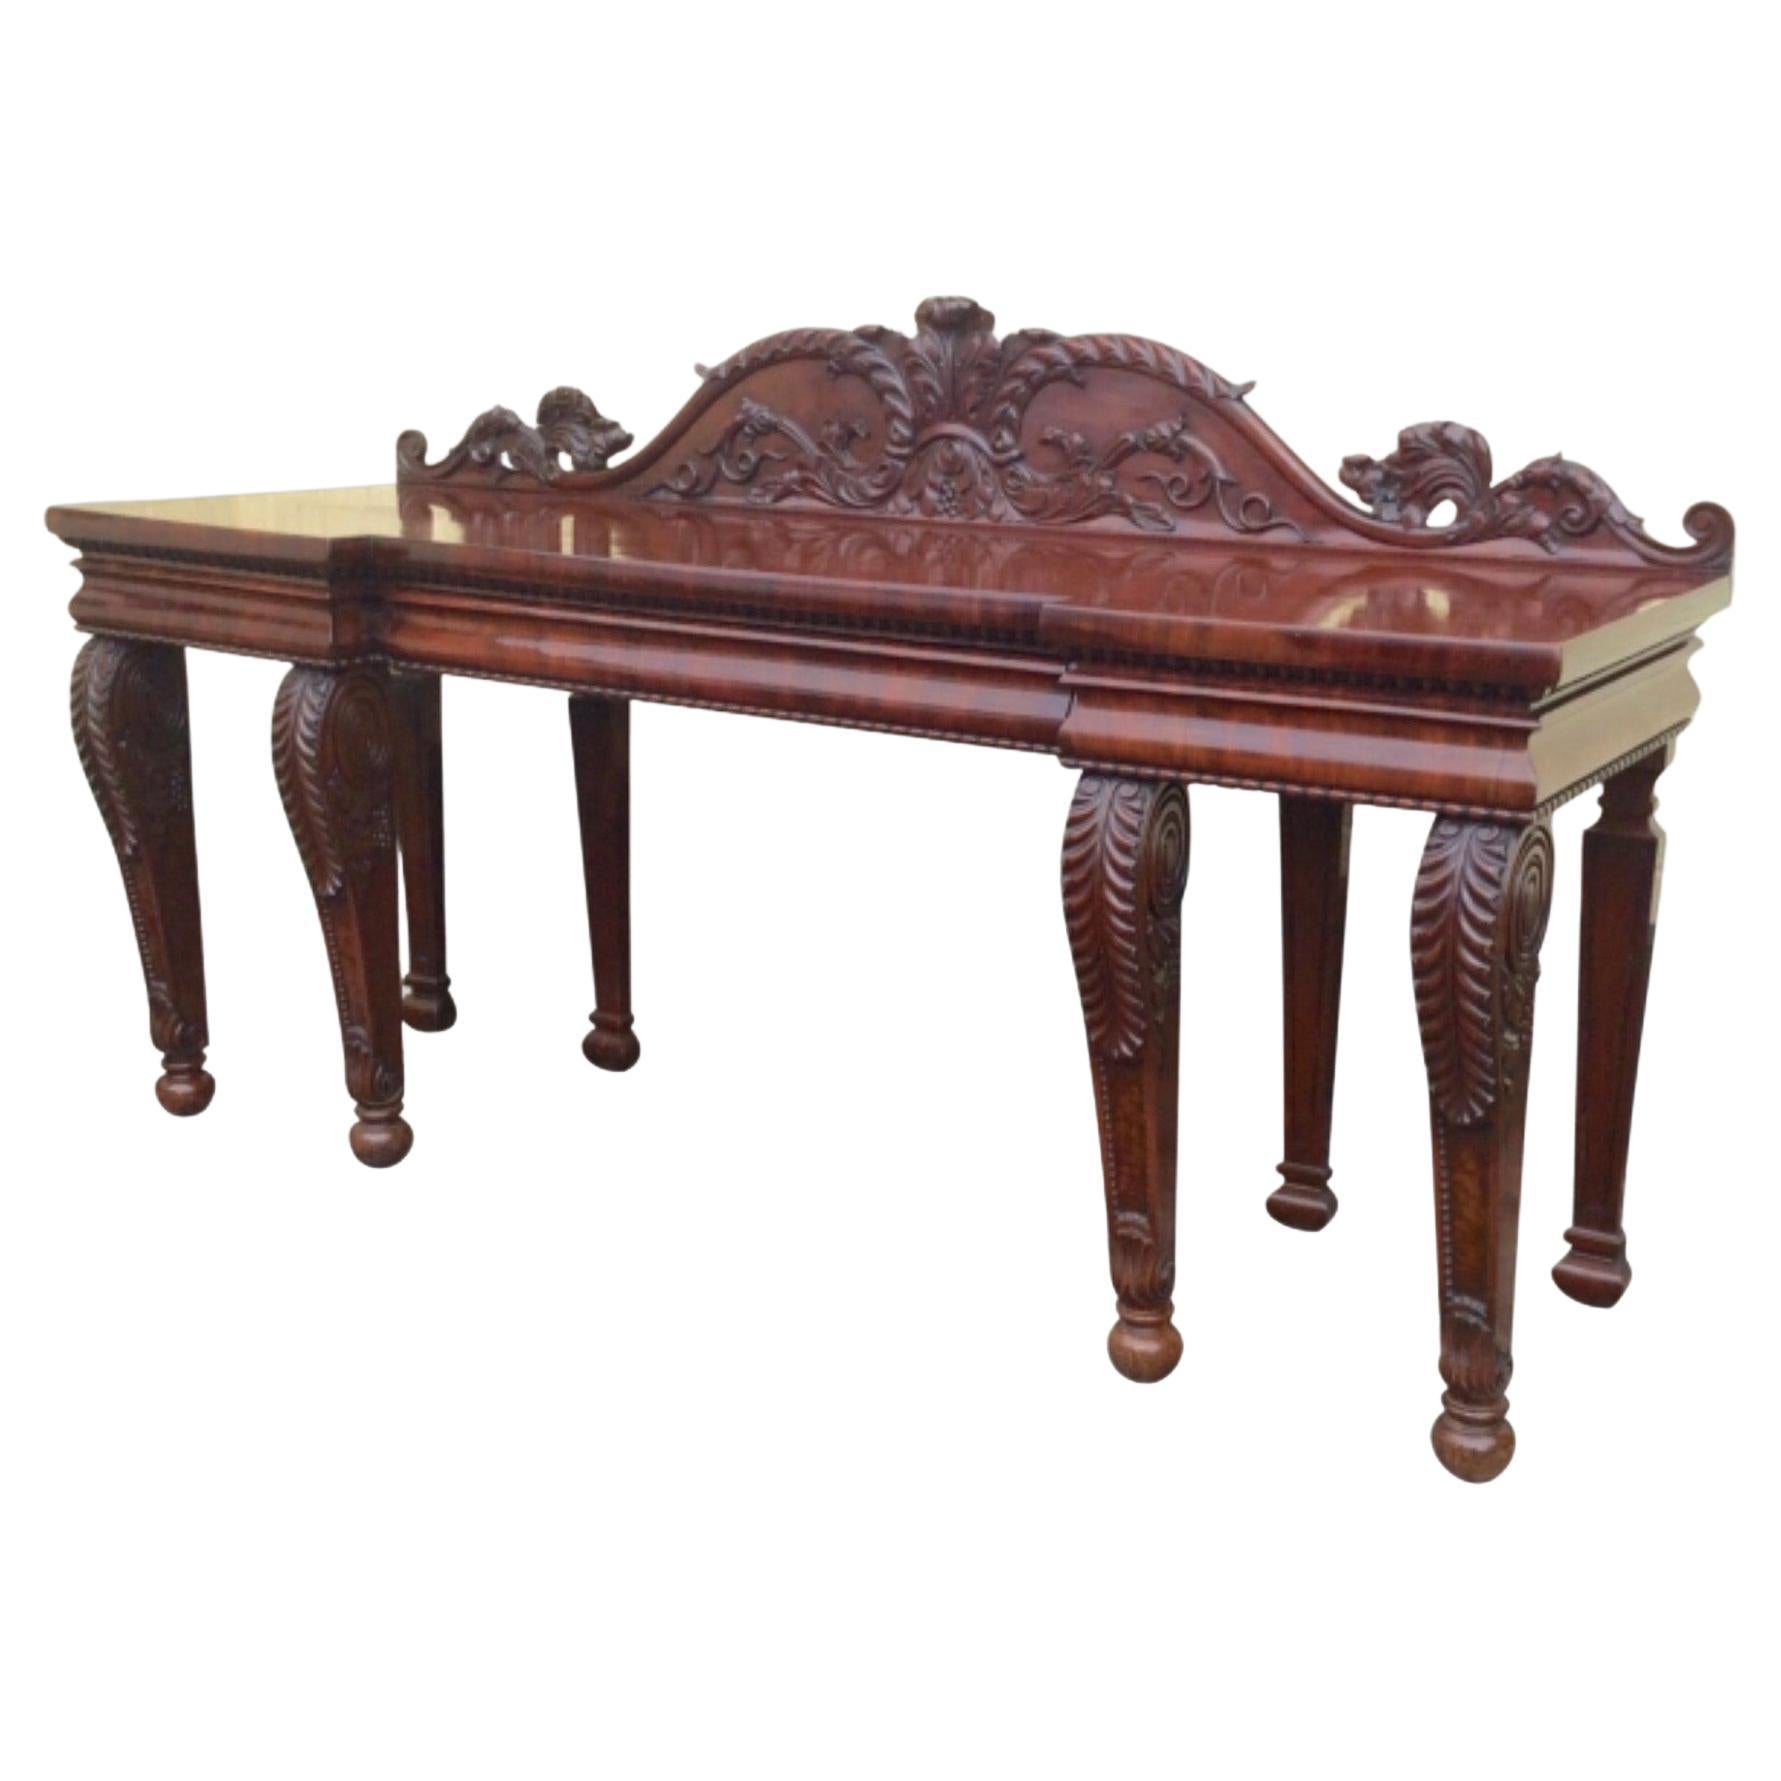 Antique Large Mahogany Console Hall Table